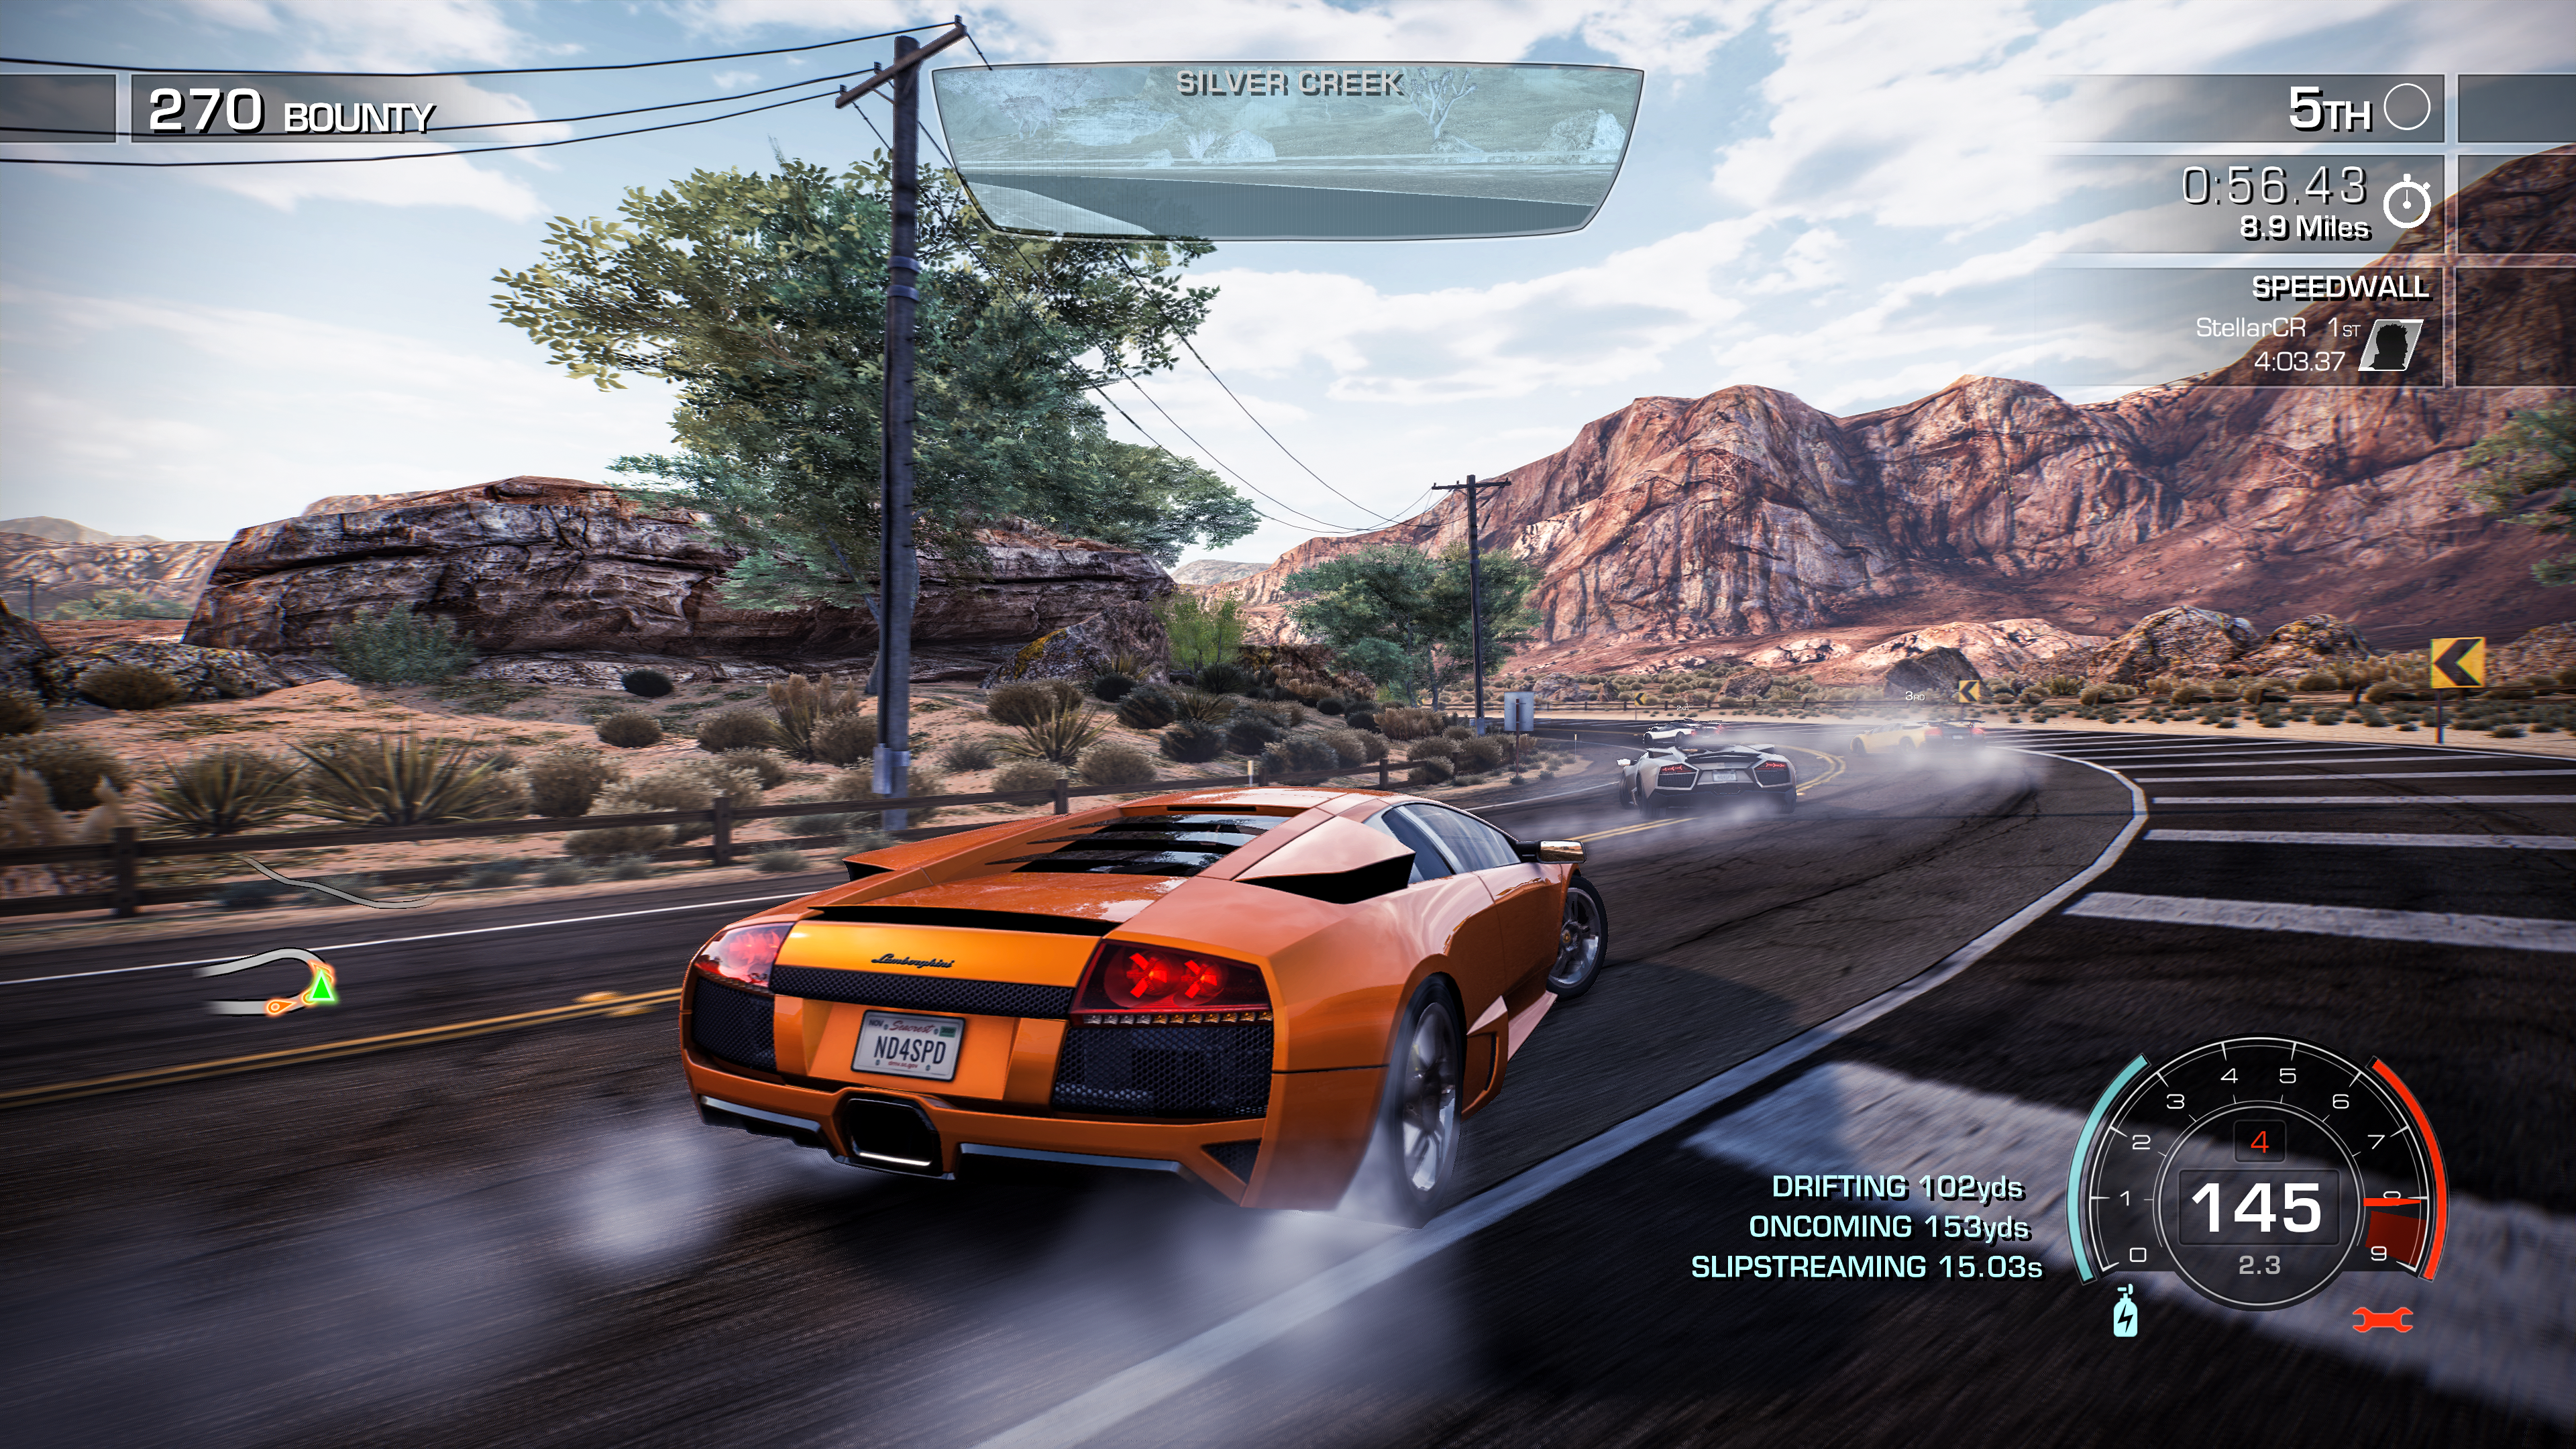 Xbox One Need For Speed Hot Pursuit - Remastered - Disponibile in 2/3 giorni lavorativi Electronic Arts